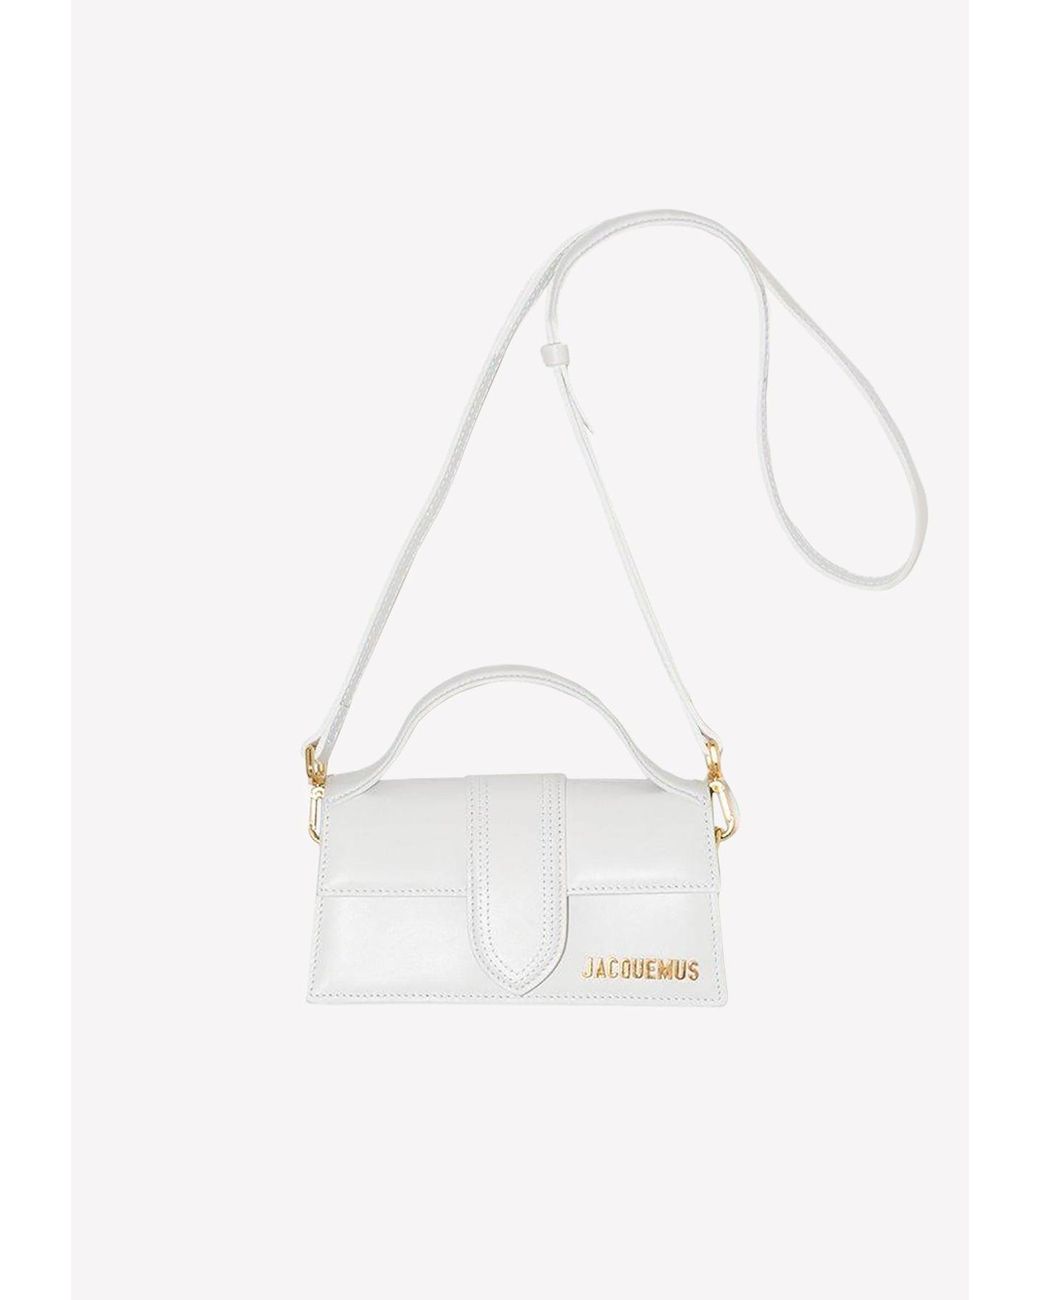 Jacquemus Le Bambino Top Handle Bag In Leather in White | Lyst UK